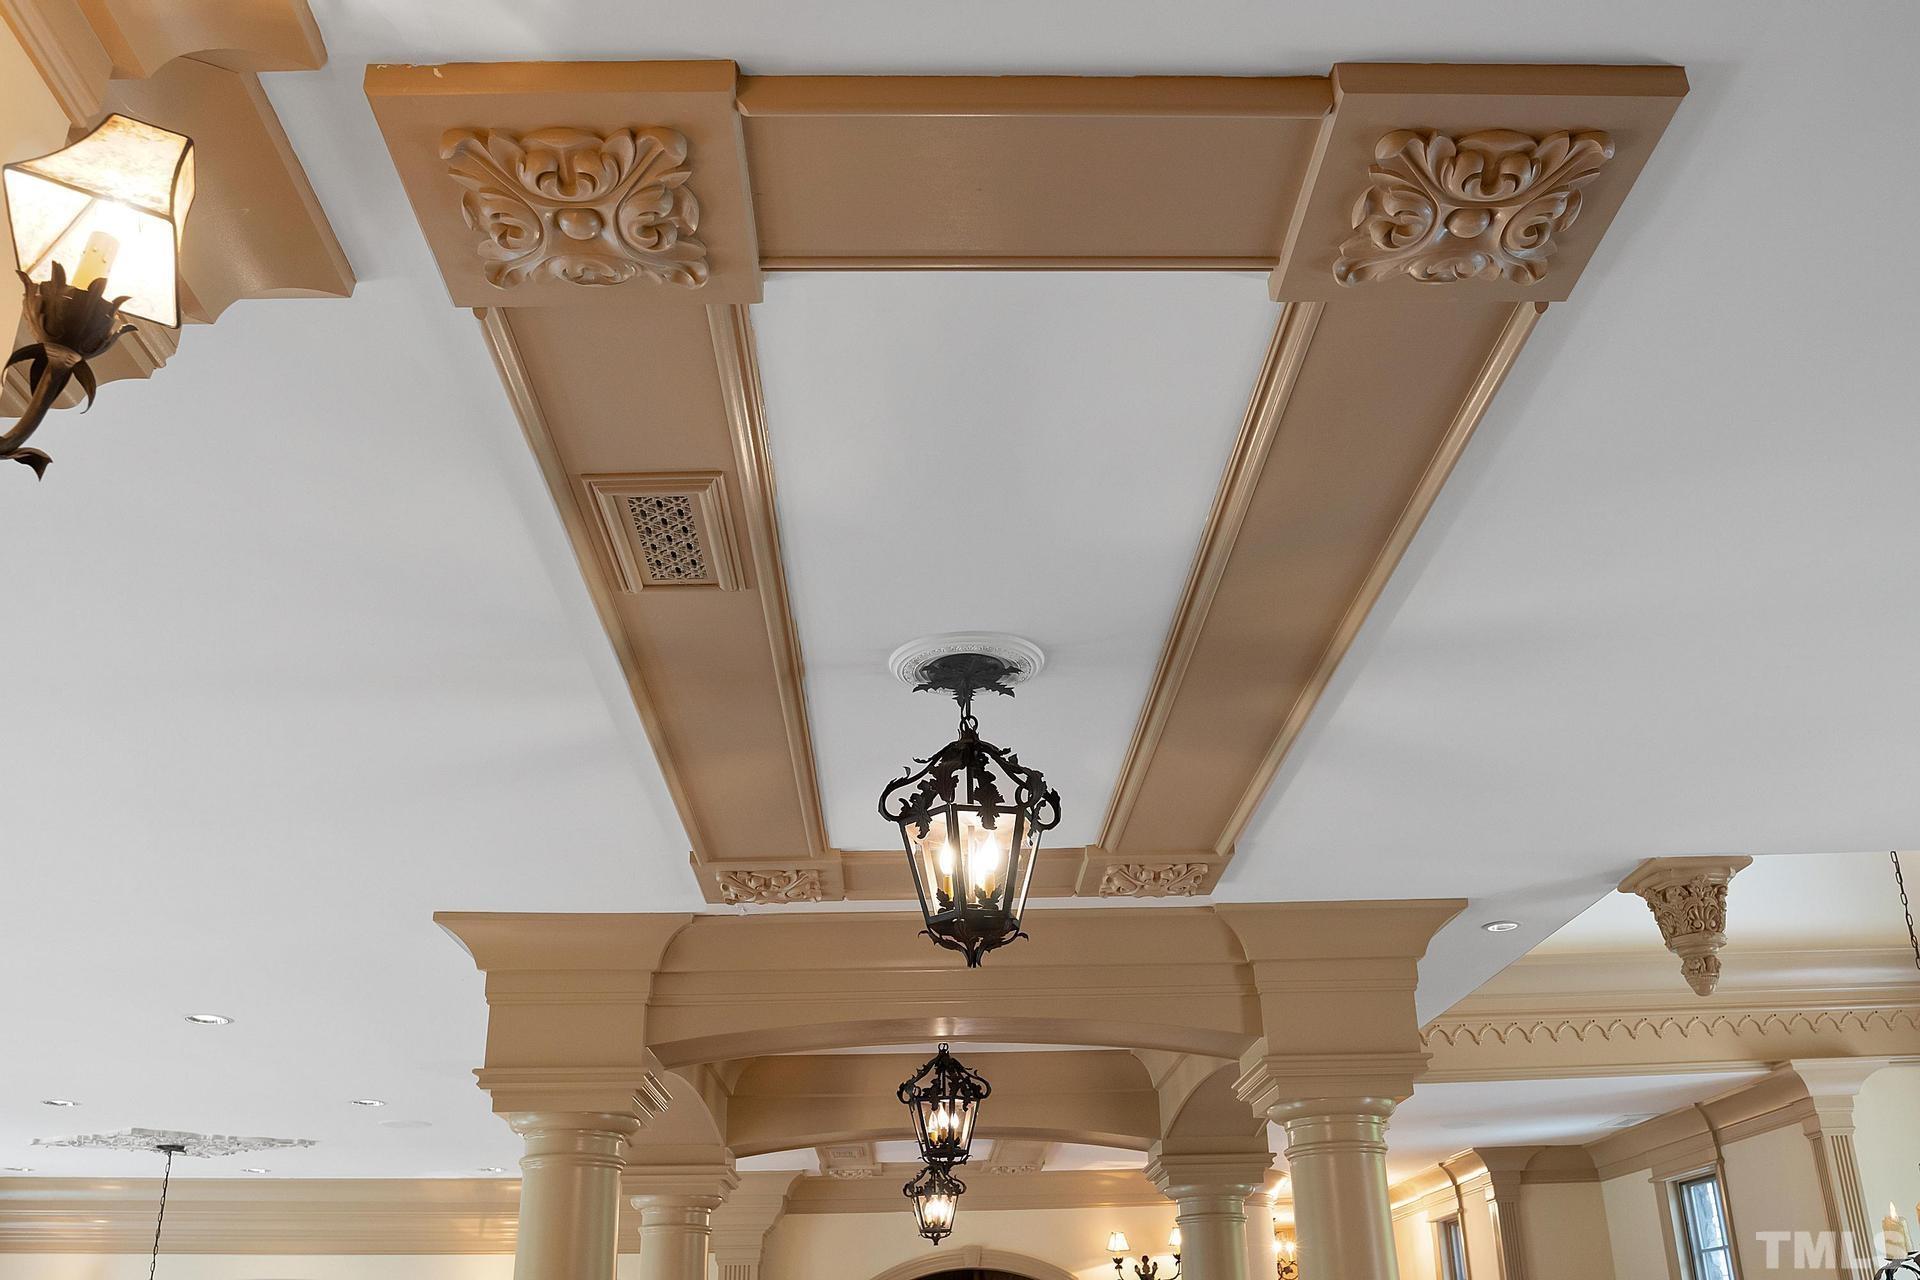 Foyer Ceiling. Extensive trim detail abounds in the home.